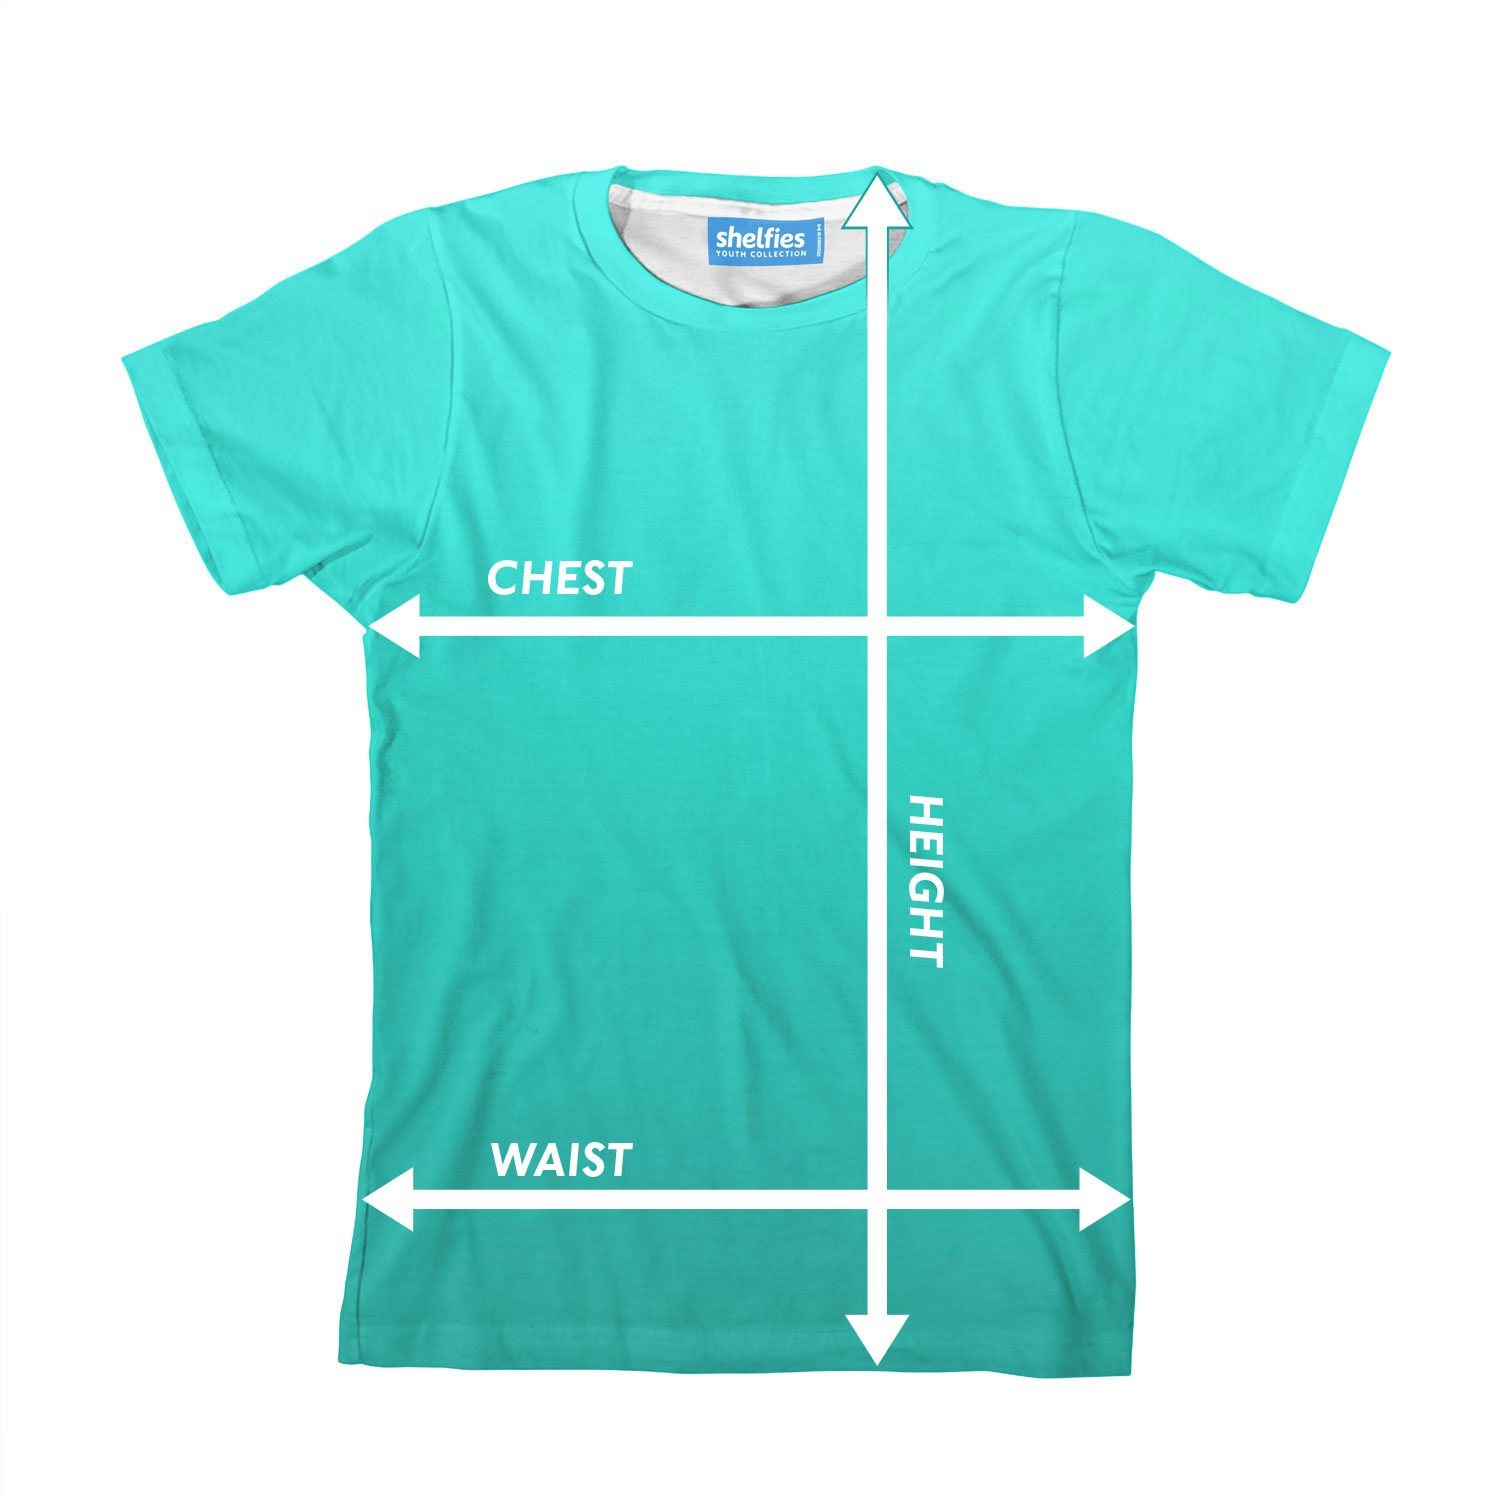 T-Shirt Sizing and Buyer Guide